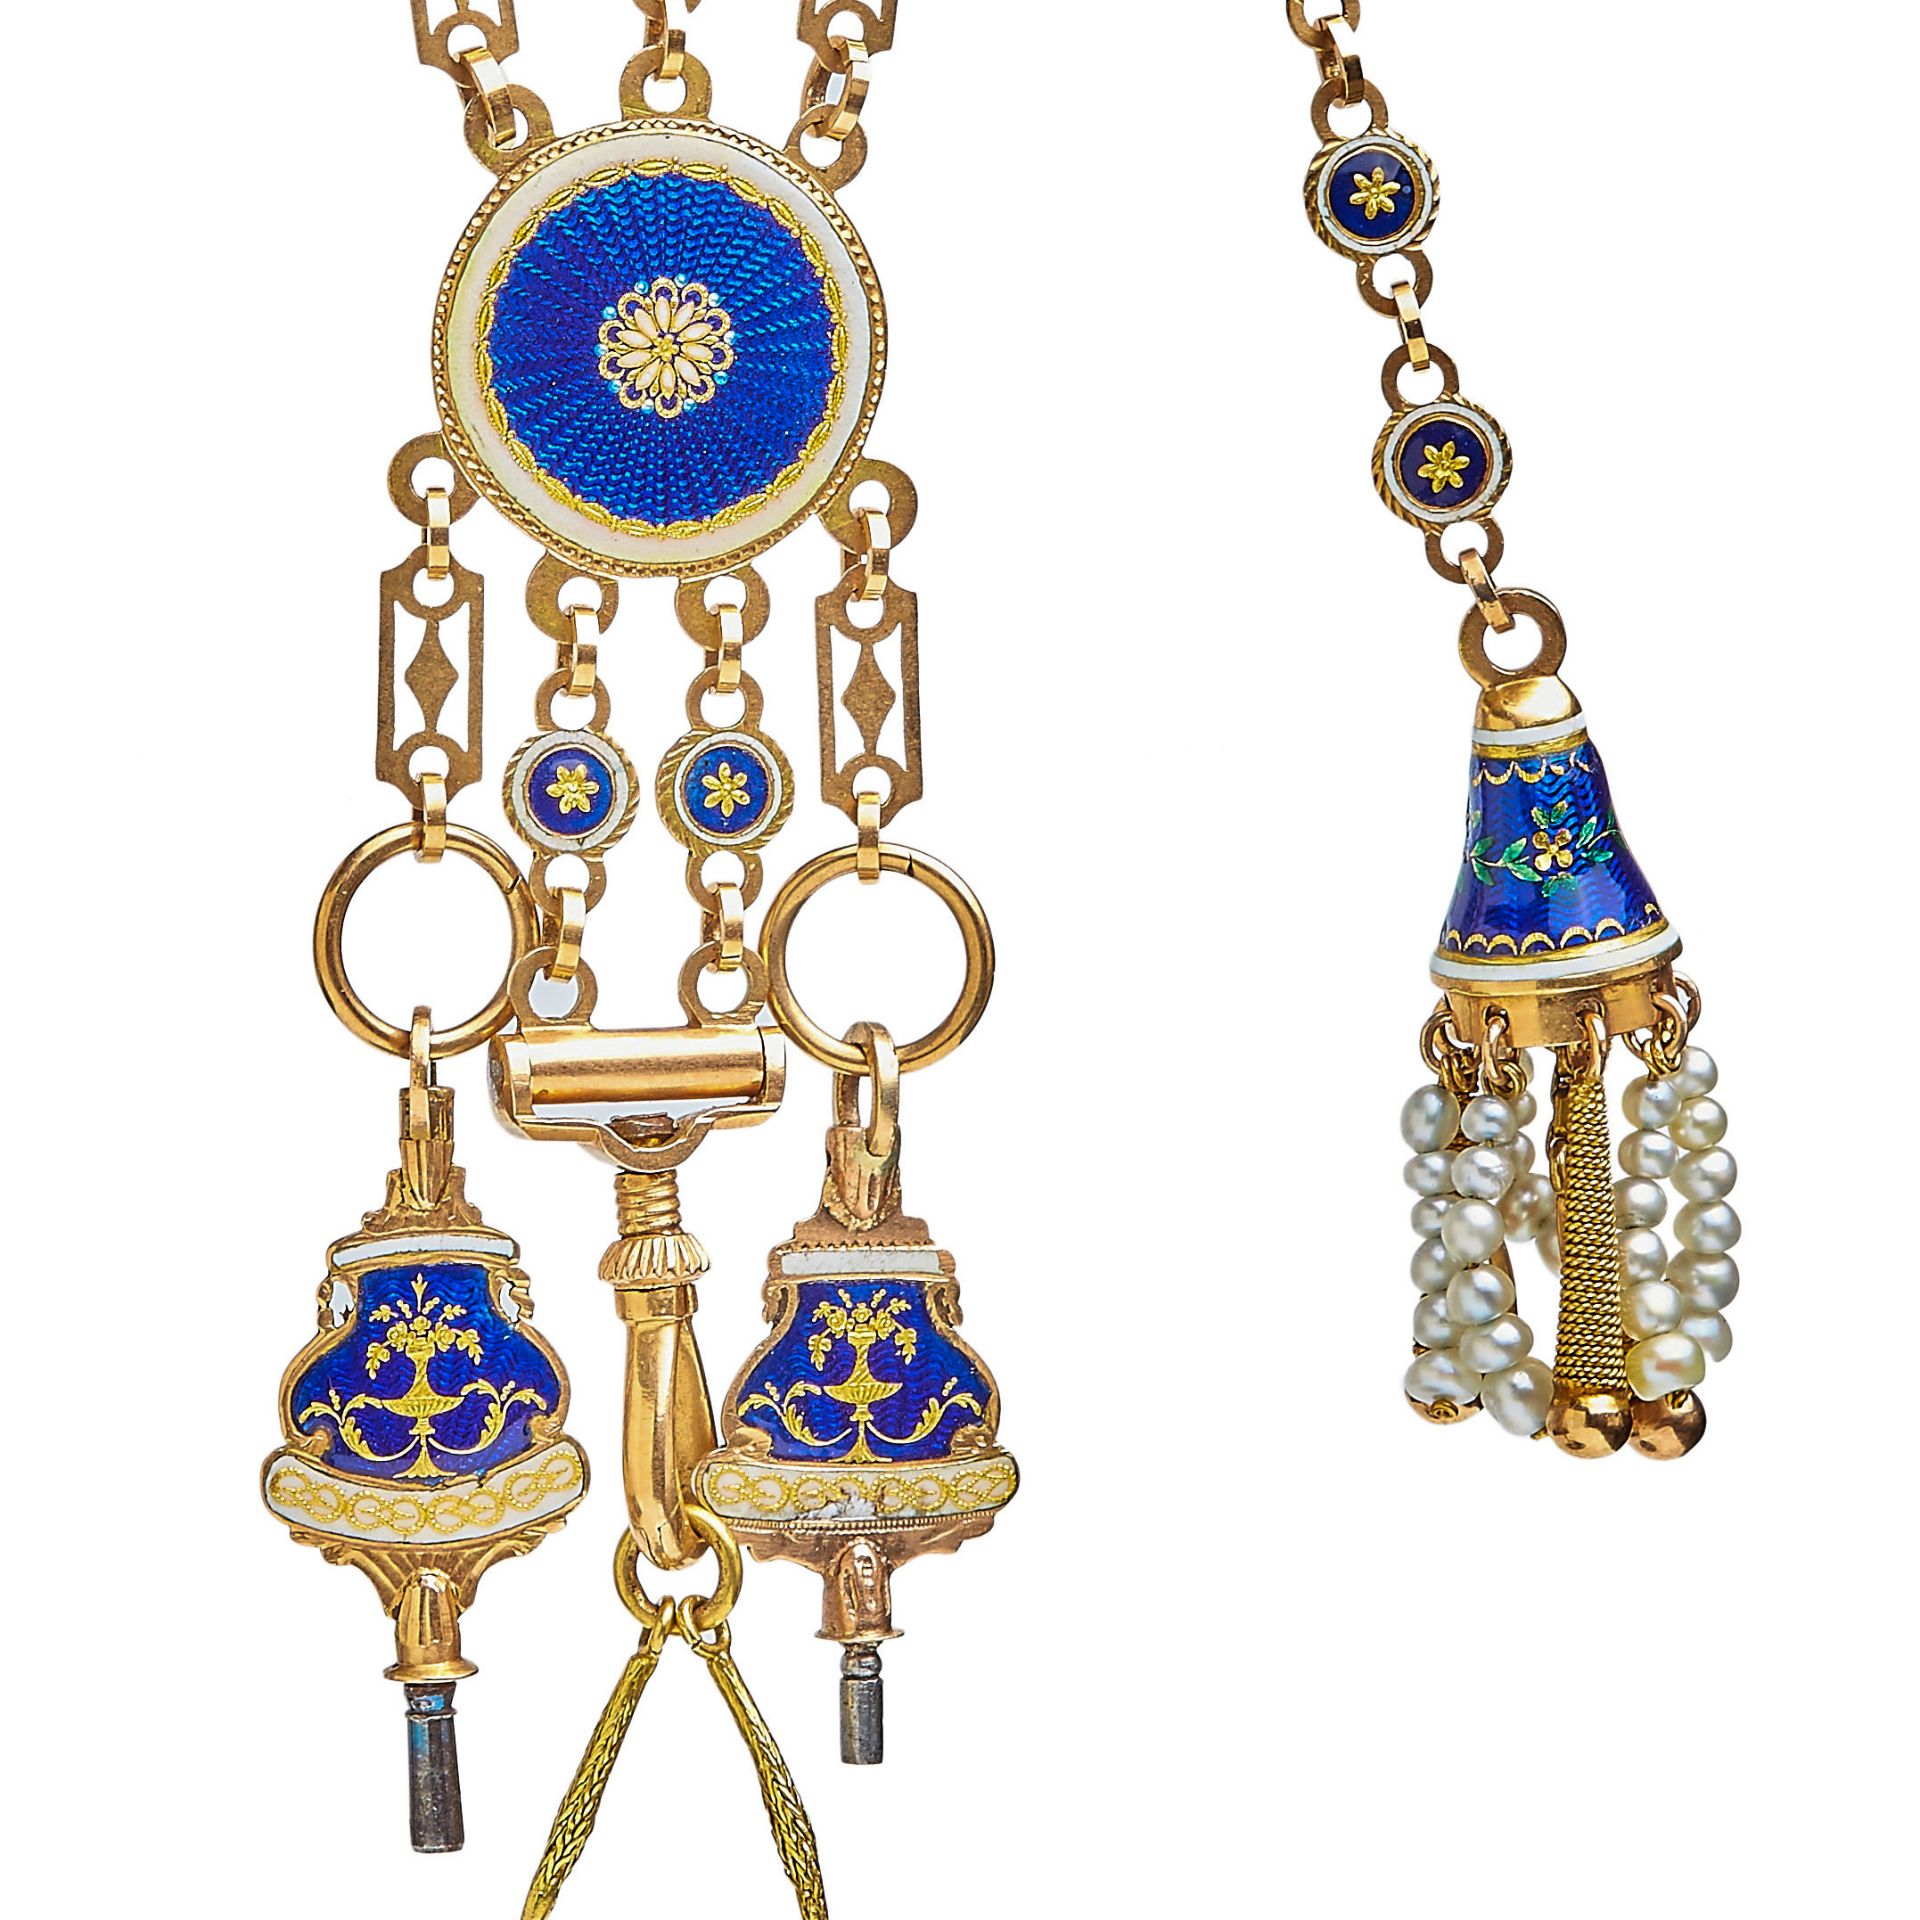 IMPORTANT GOLD AND ENAMEL POCKETWATCH CHATELAINE - Image 5 of 5